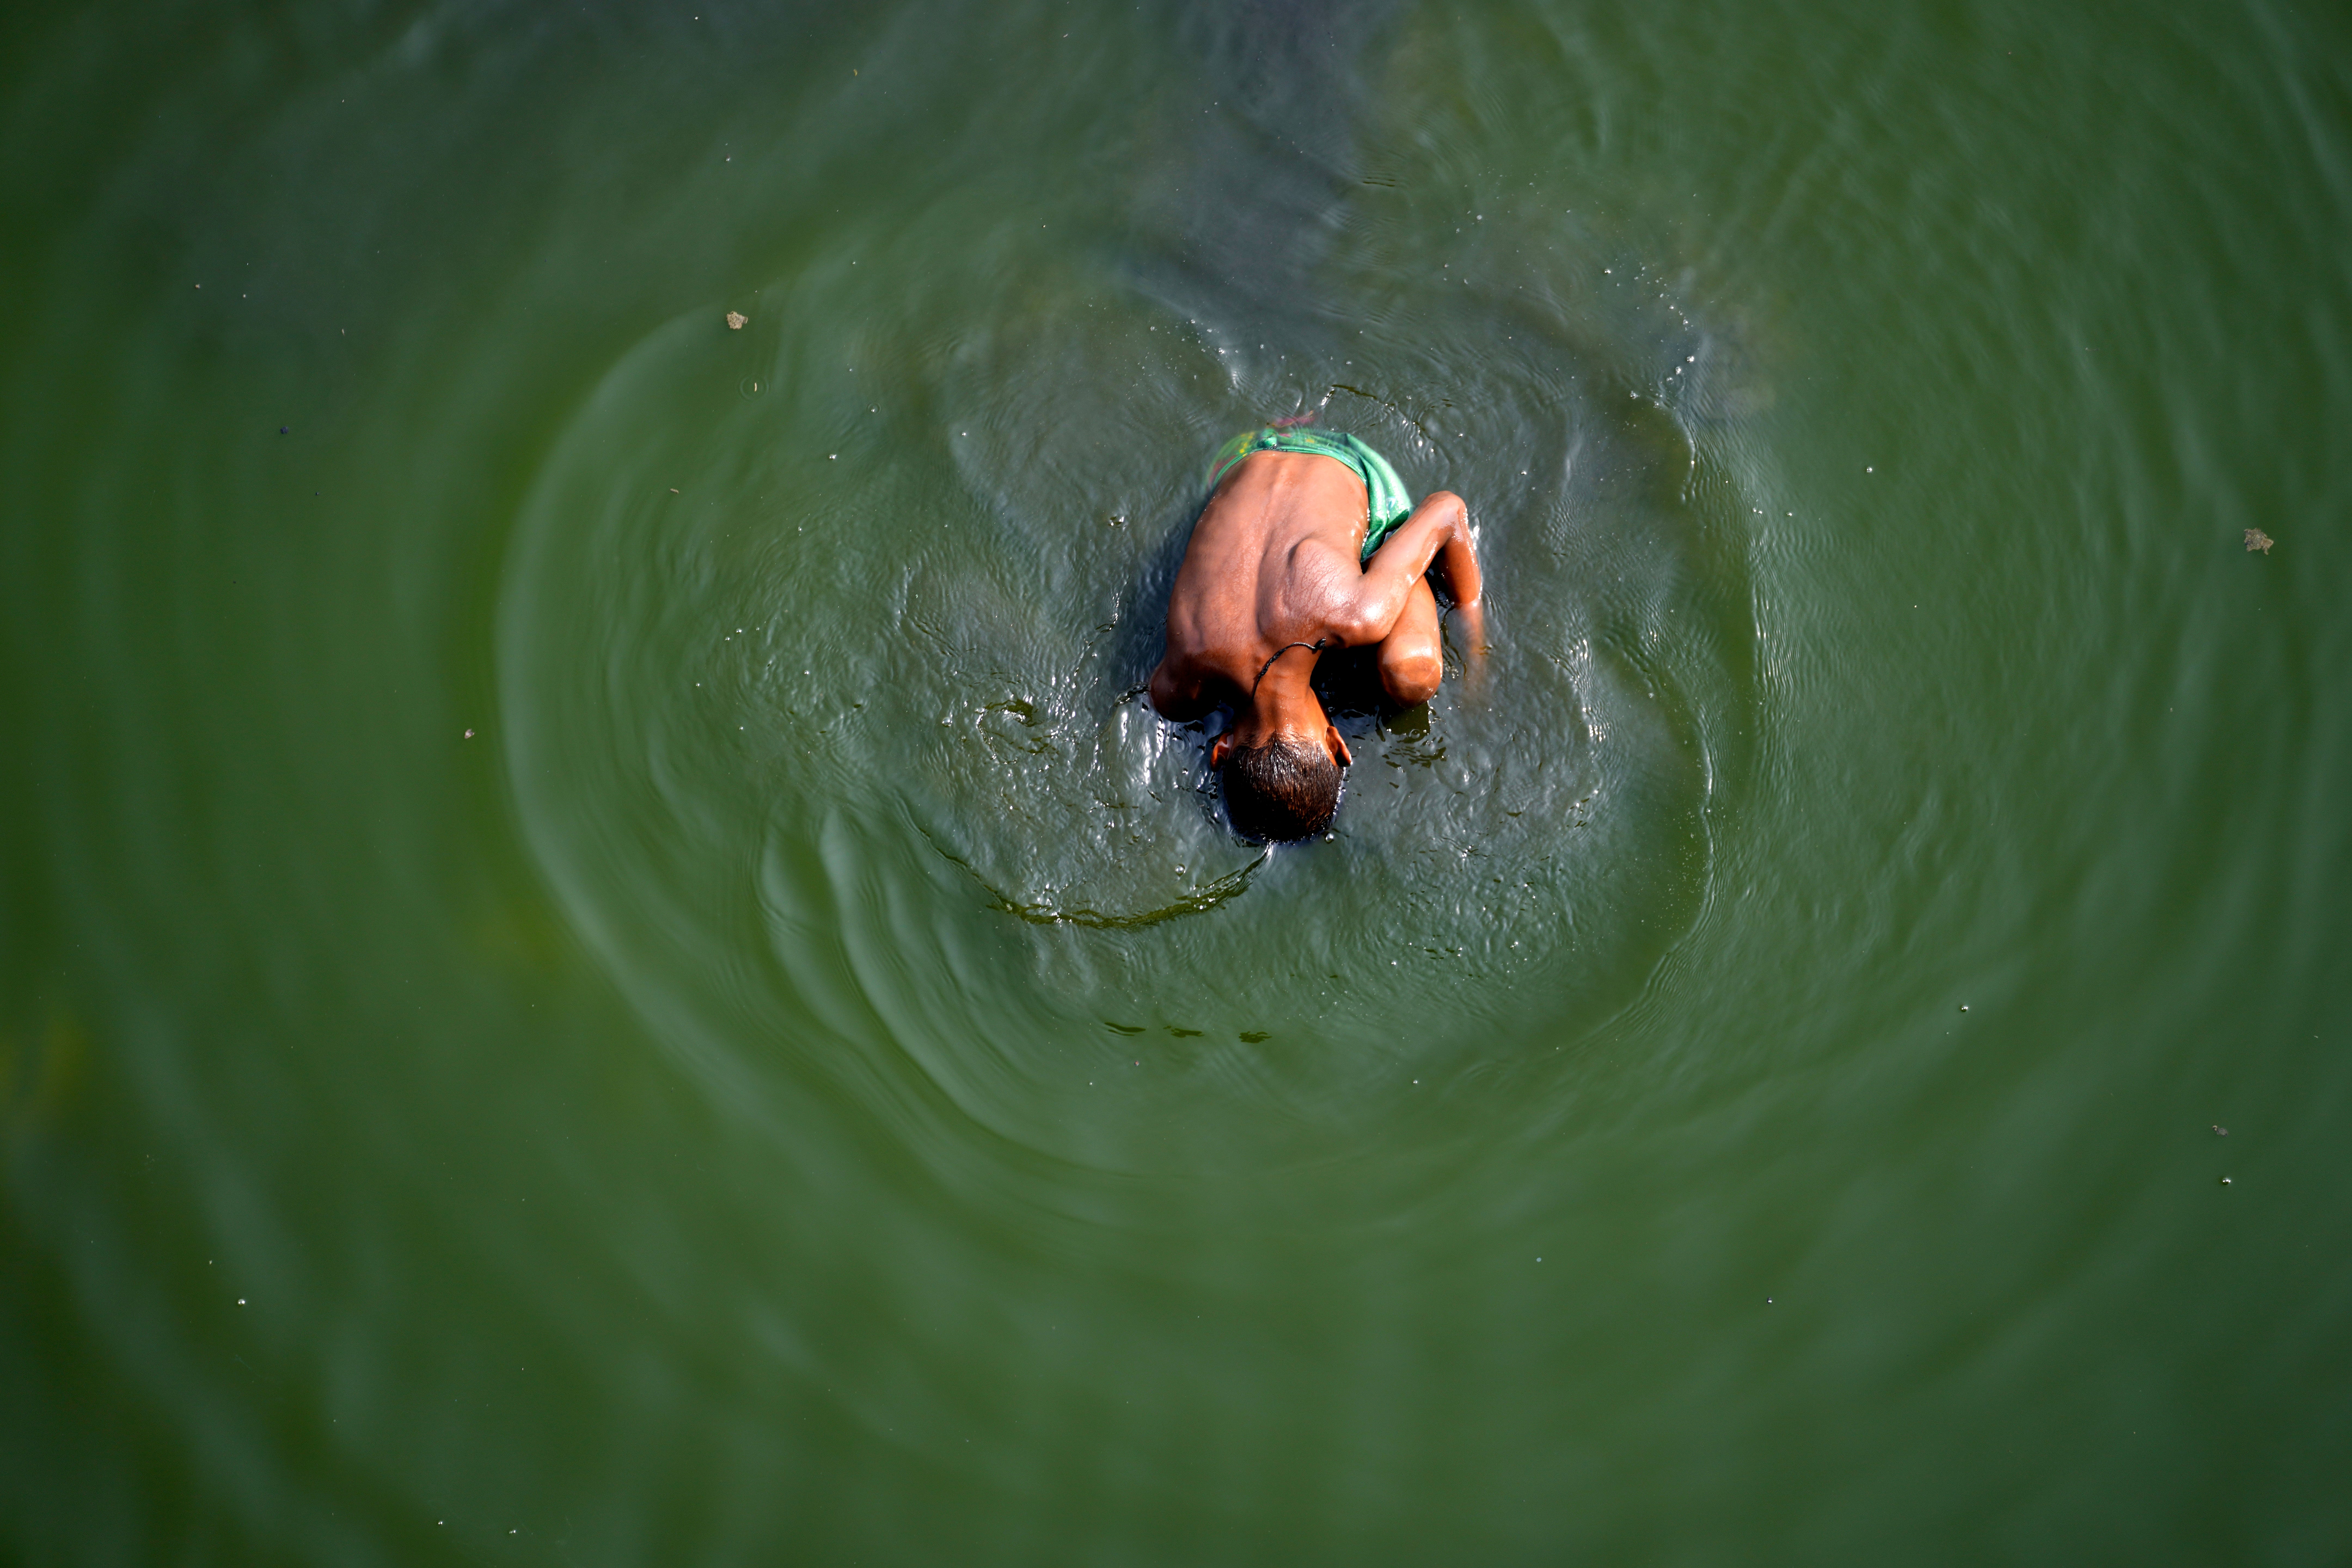 A boy searches for coins in river Yamuna where water levels have drastically reduced following a heatwave in India